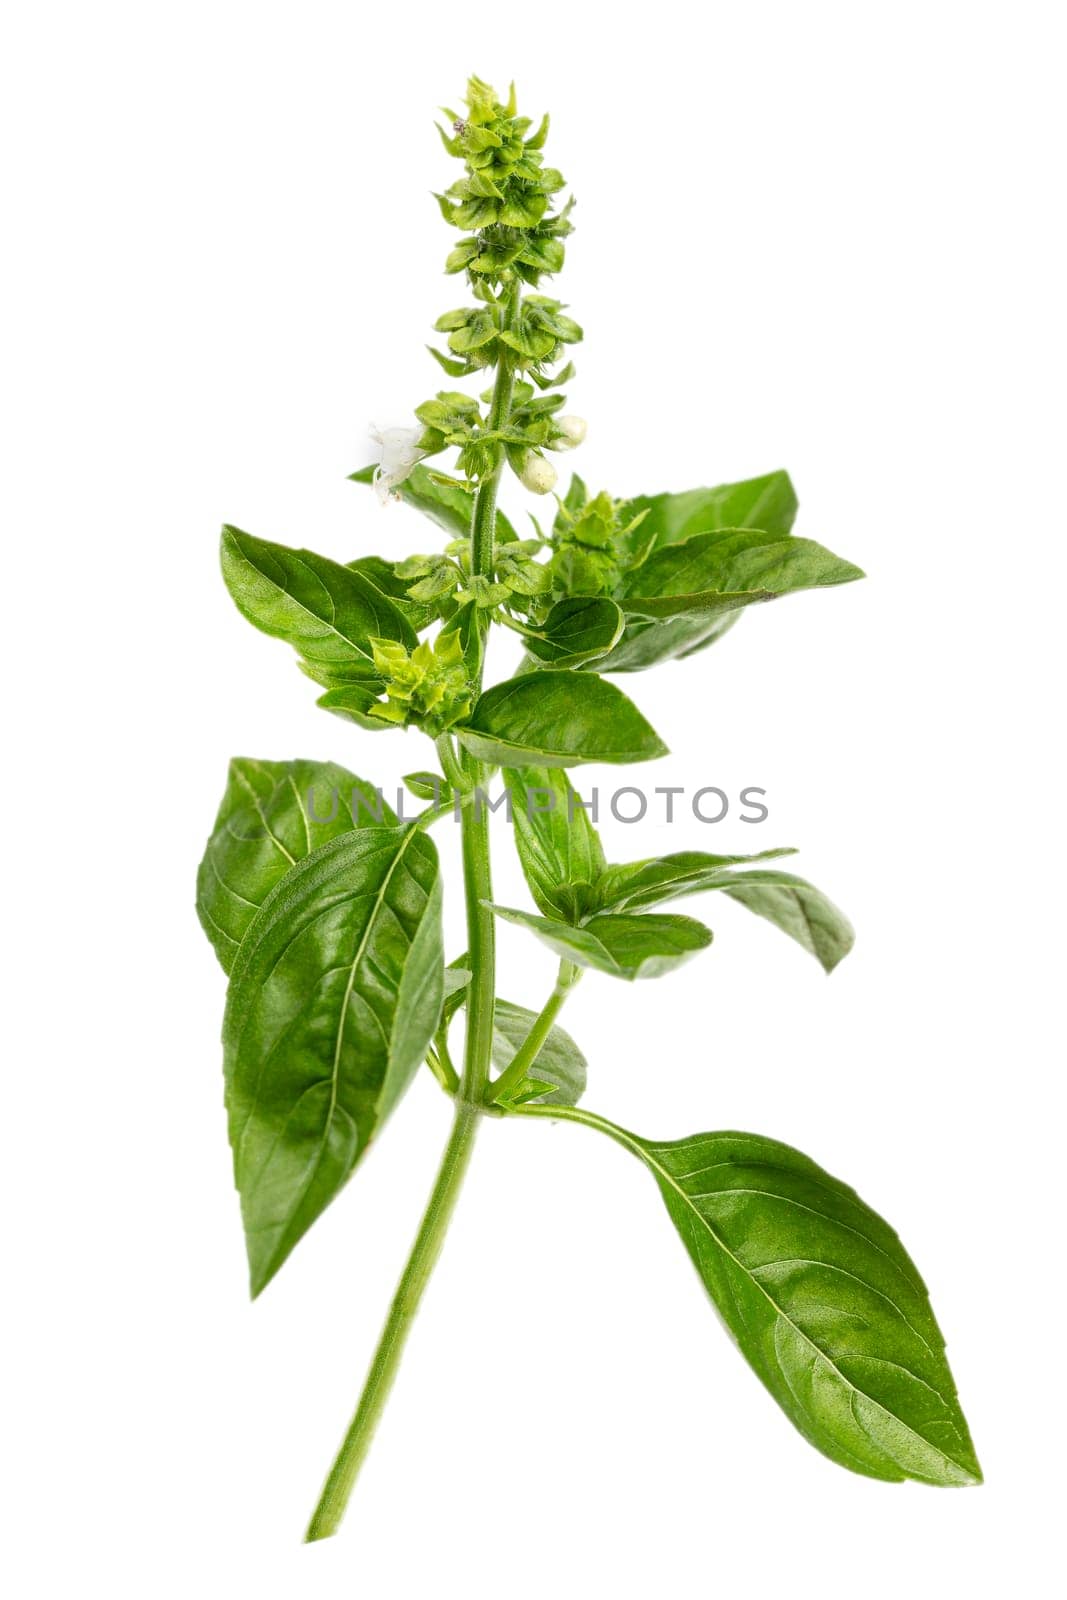 Branch of fresh green sweet basil, Genovese basil, Ocimum basilicum, a culinary herb family Lamiaceae isolated on white by JPC-PROD